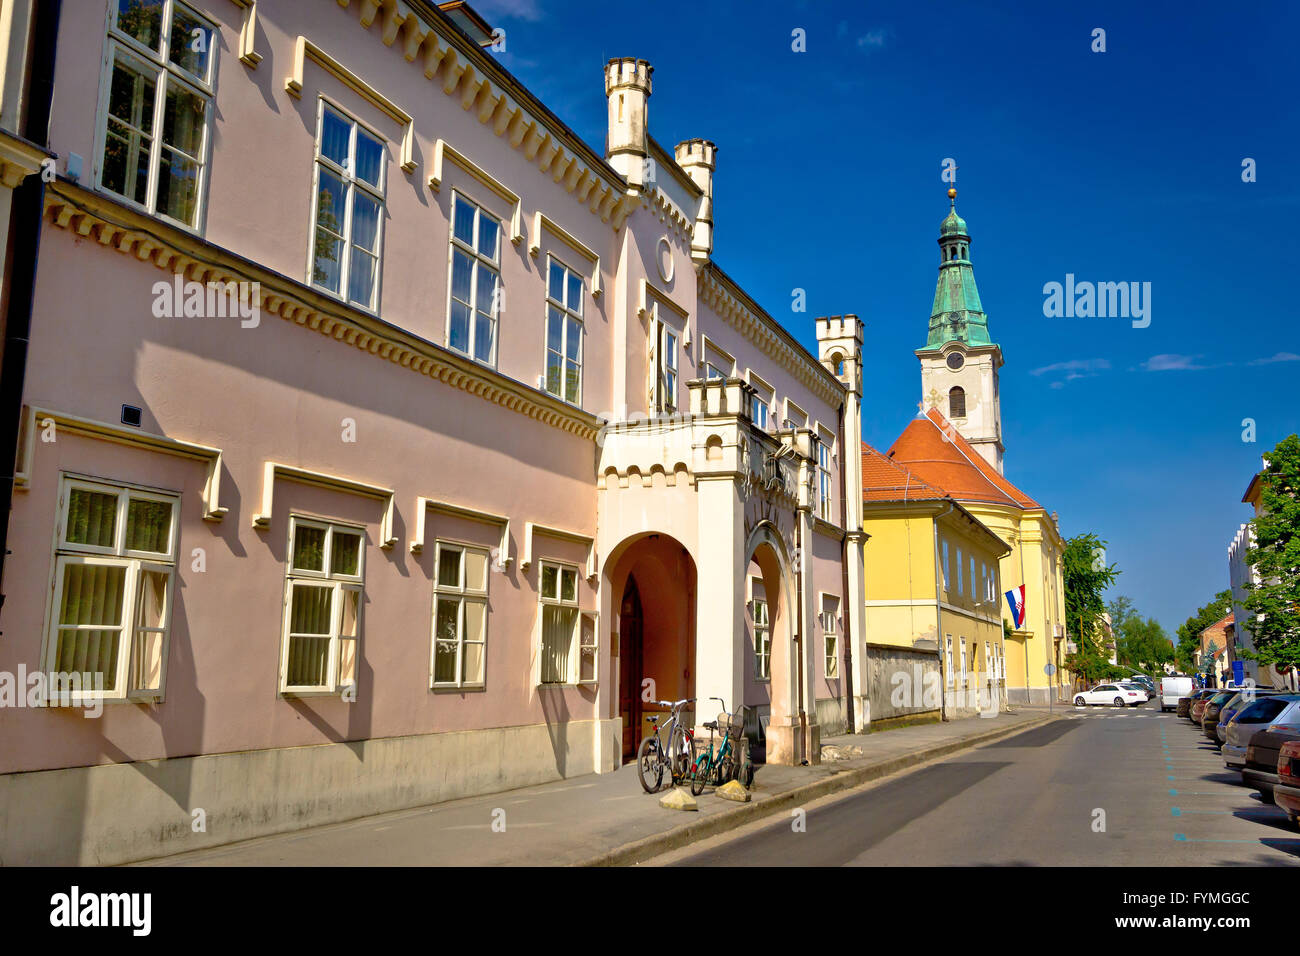 Historic architecture of town Bjelovar Stock Photo